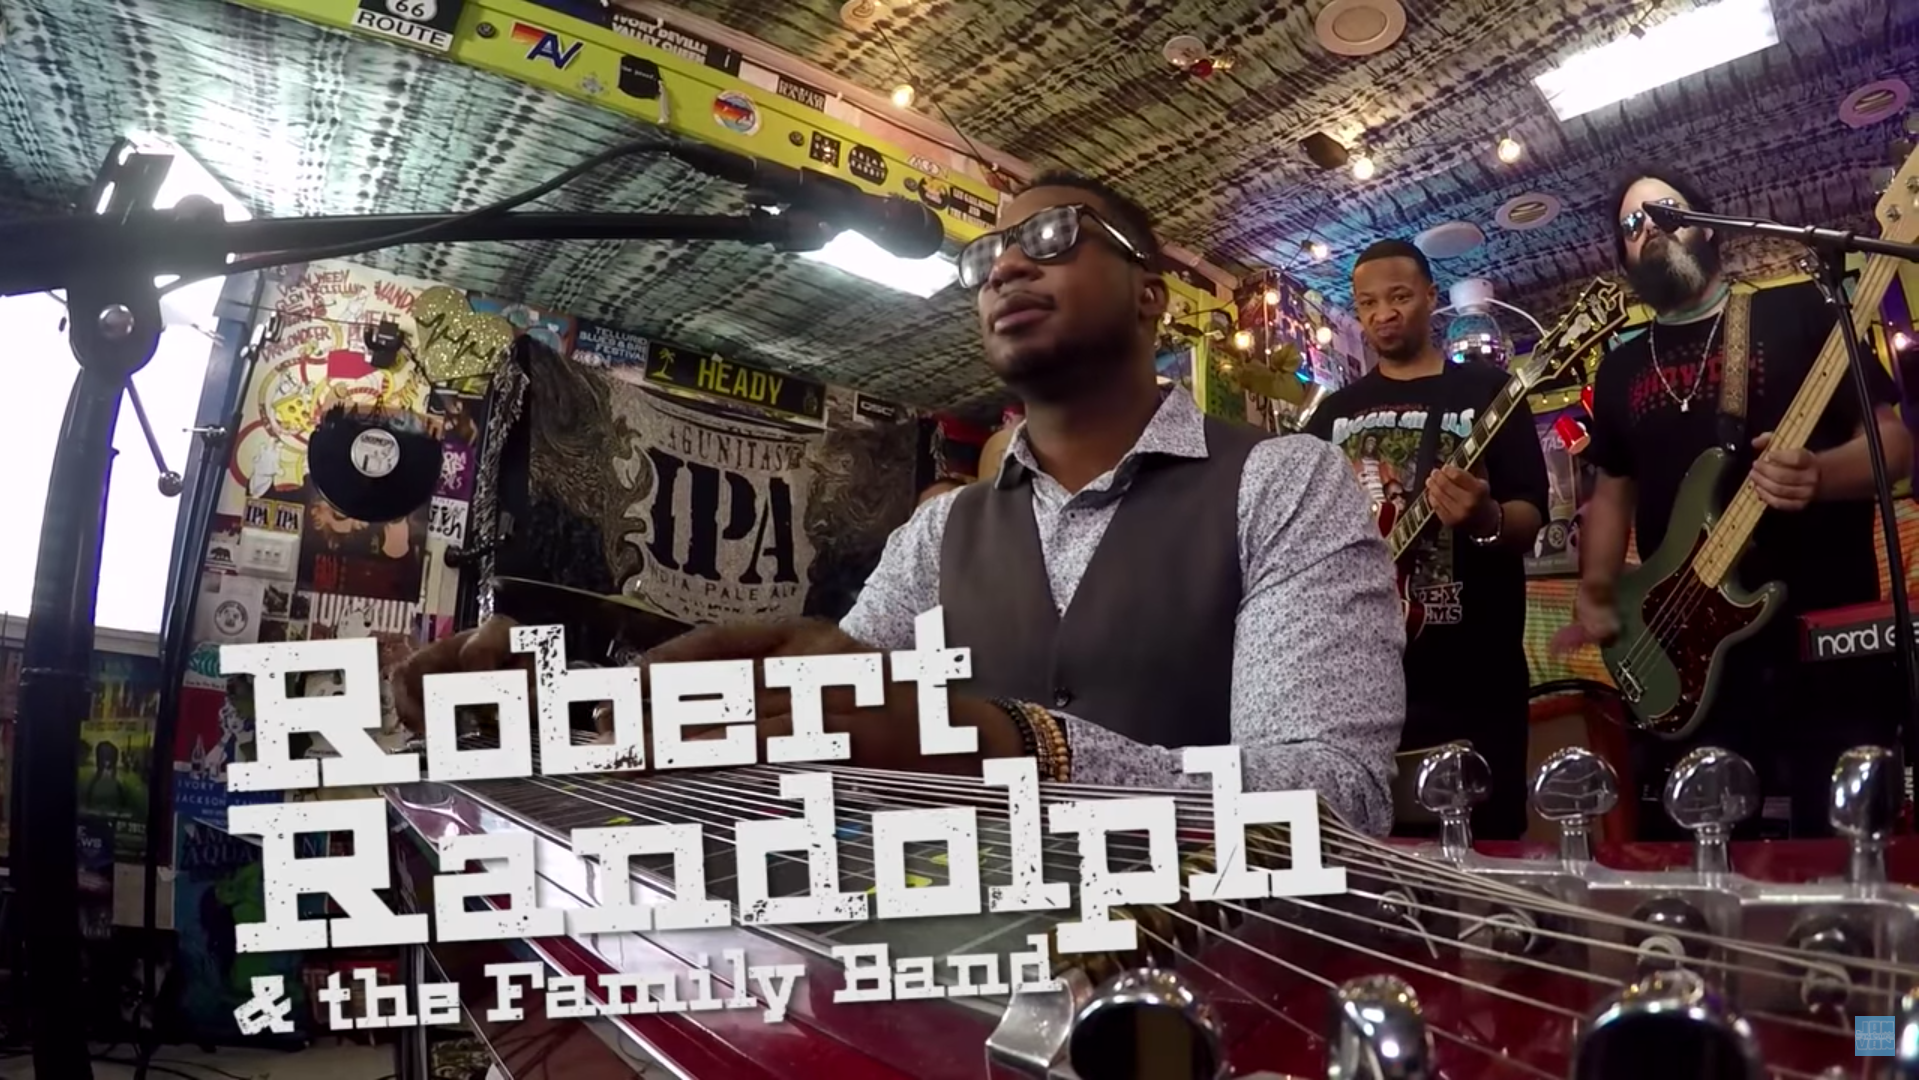 Robert Randolph and the Family Band at Jam in the Van. Photo by: Jam in the Van / YouTube